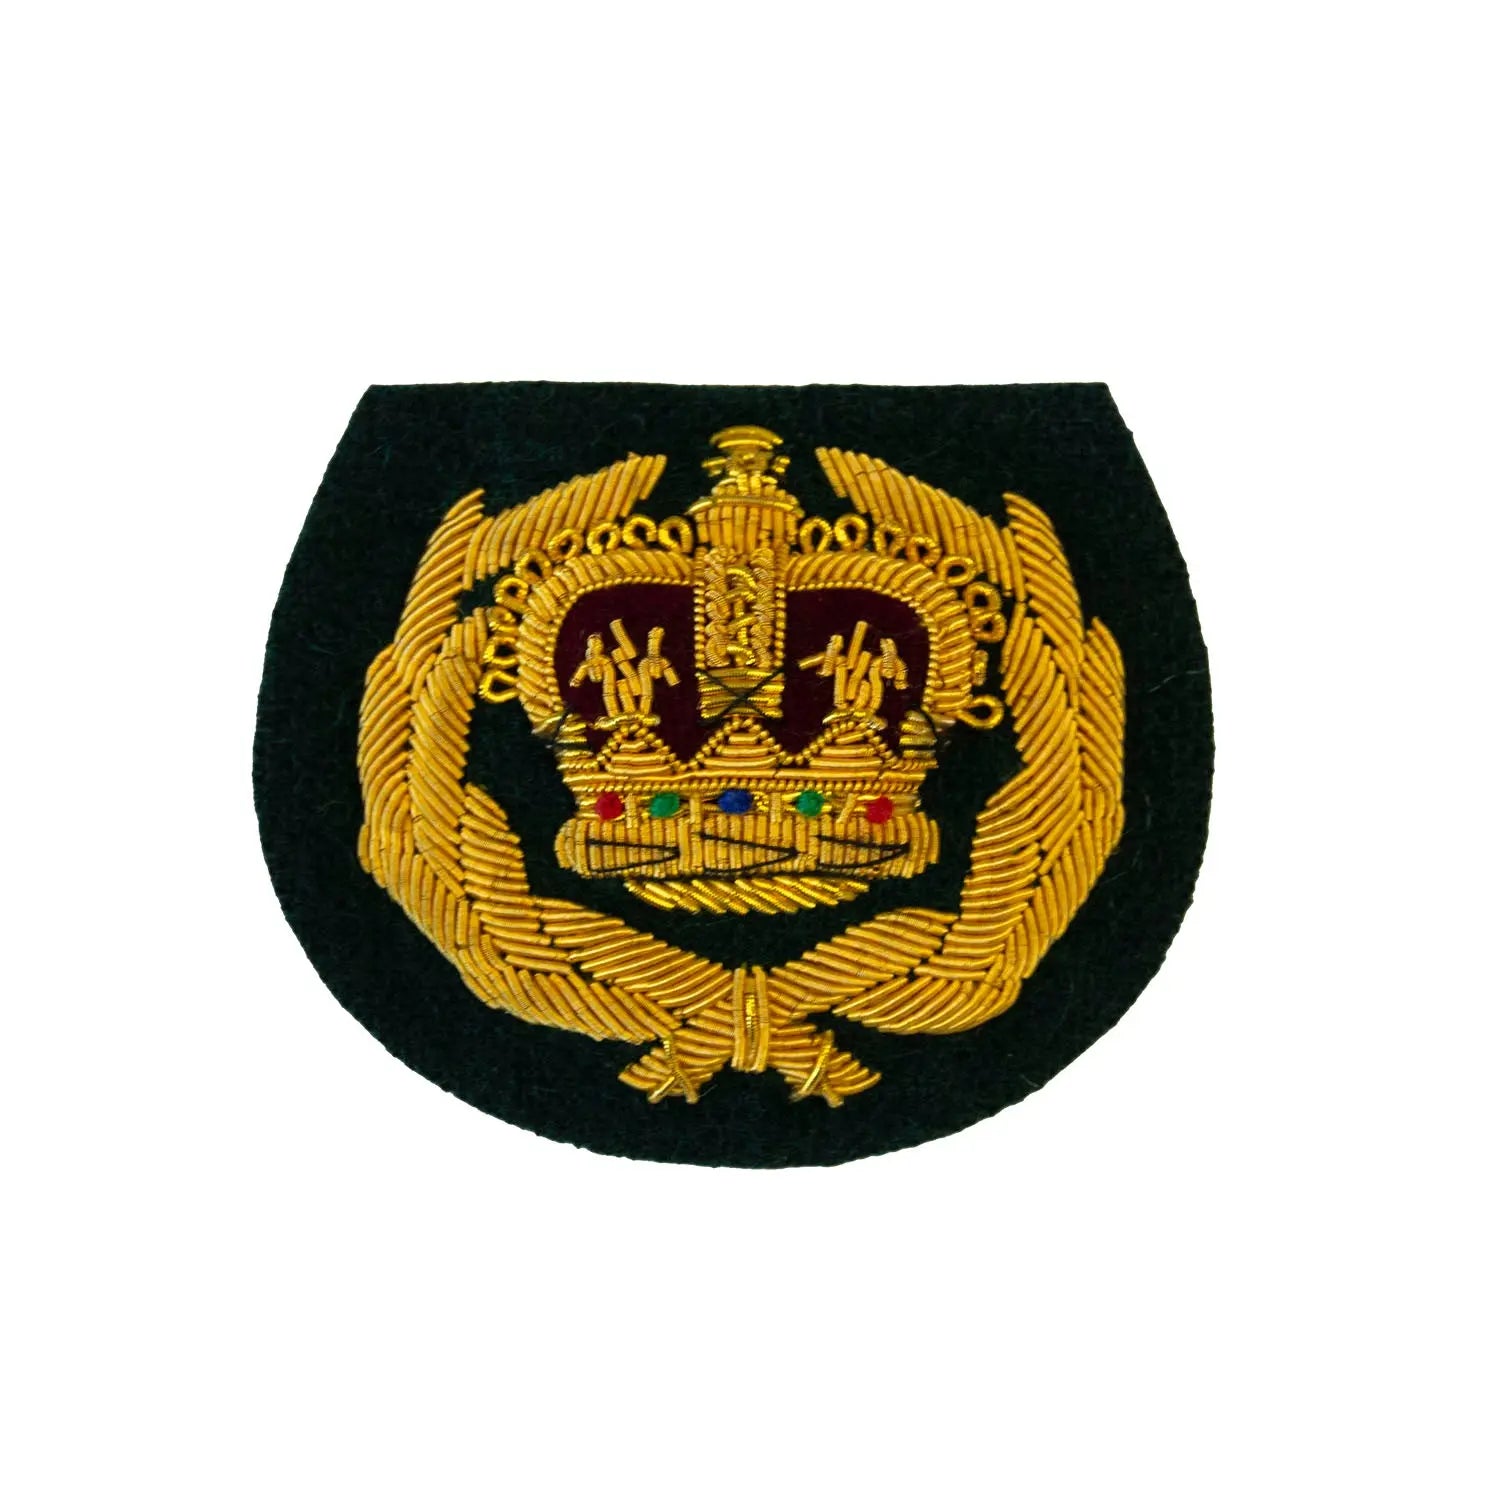 Quartermaster Sergeant WO2 Royal Marines Crown and Wreath Rank Badge wyedean